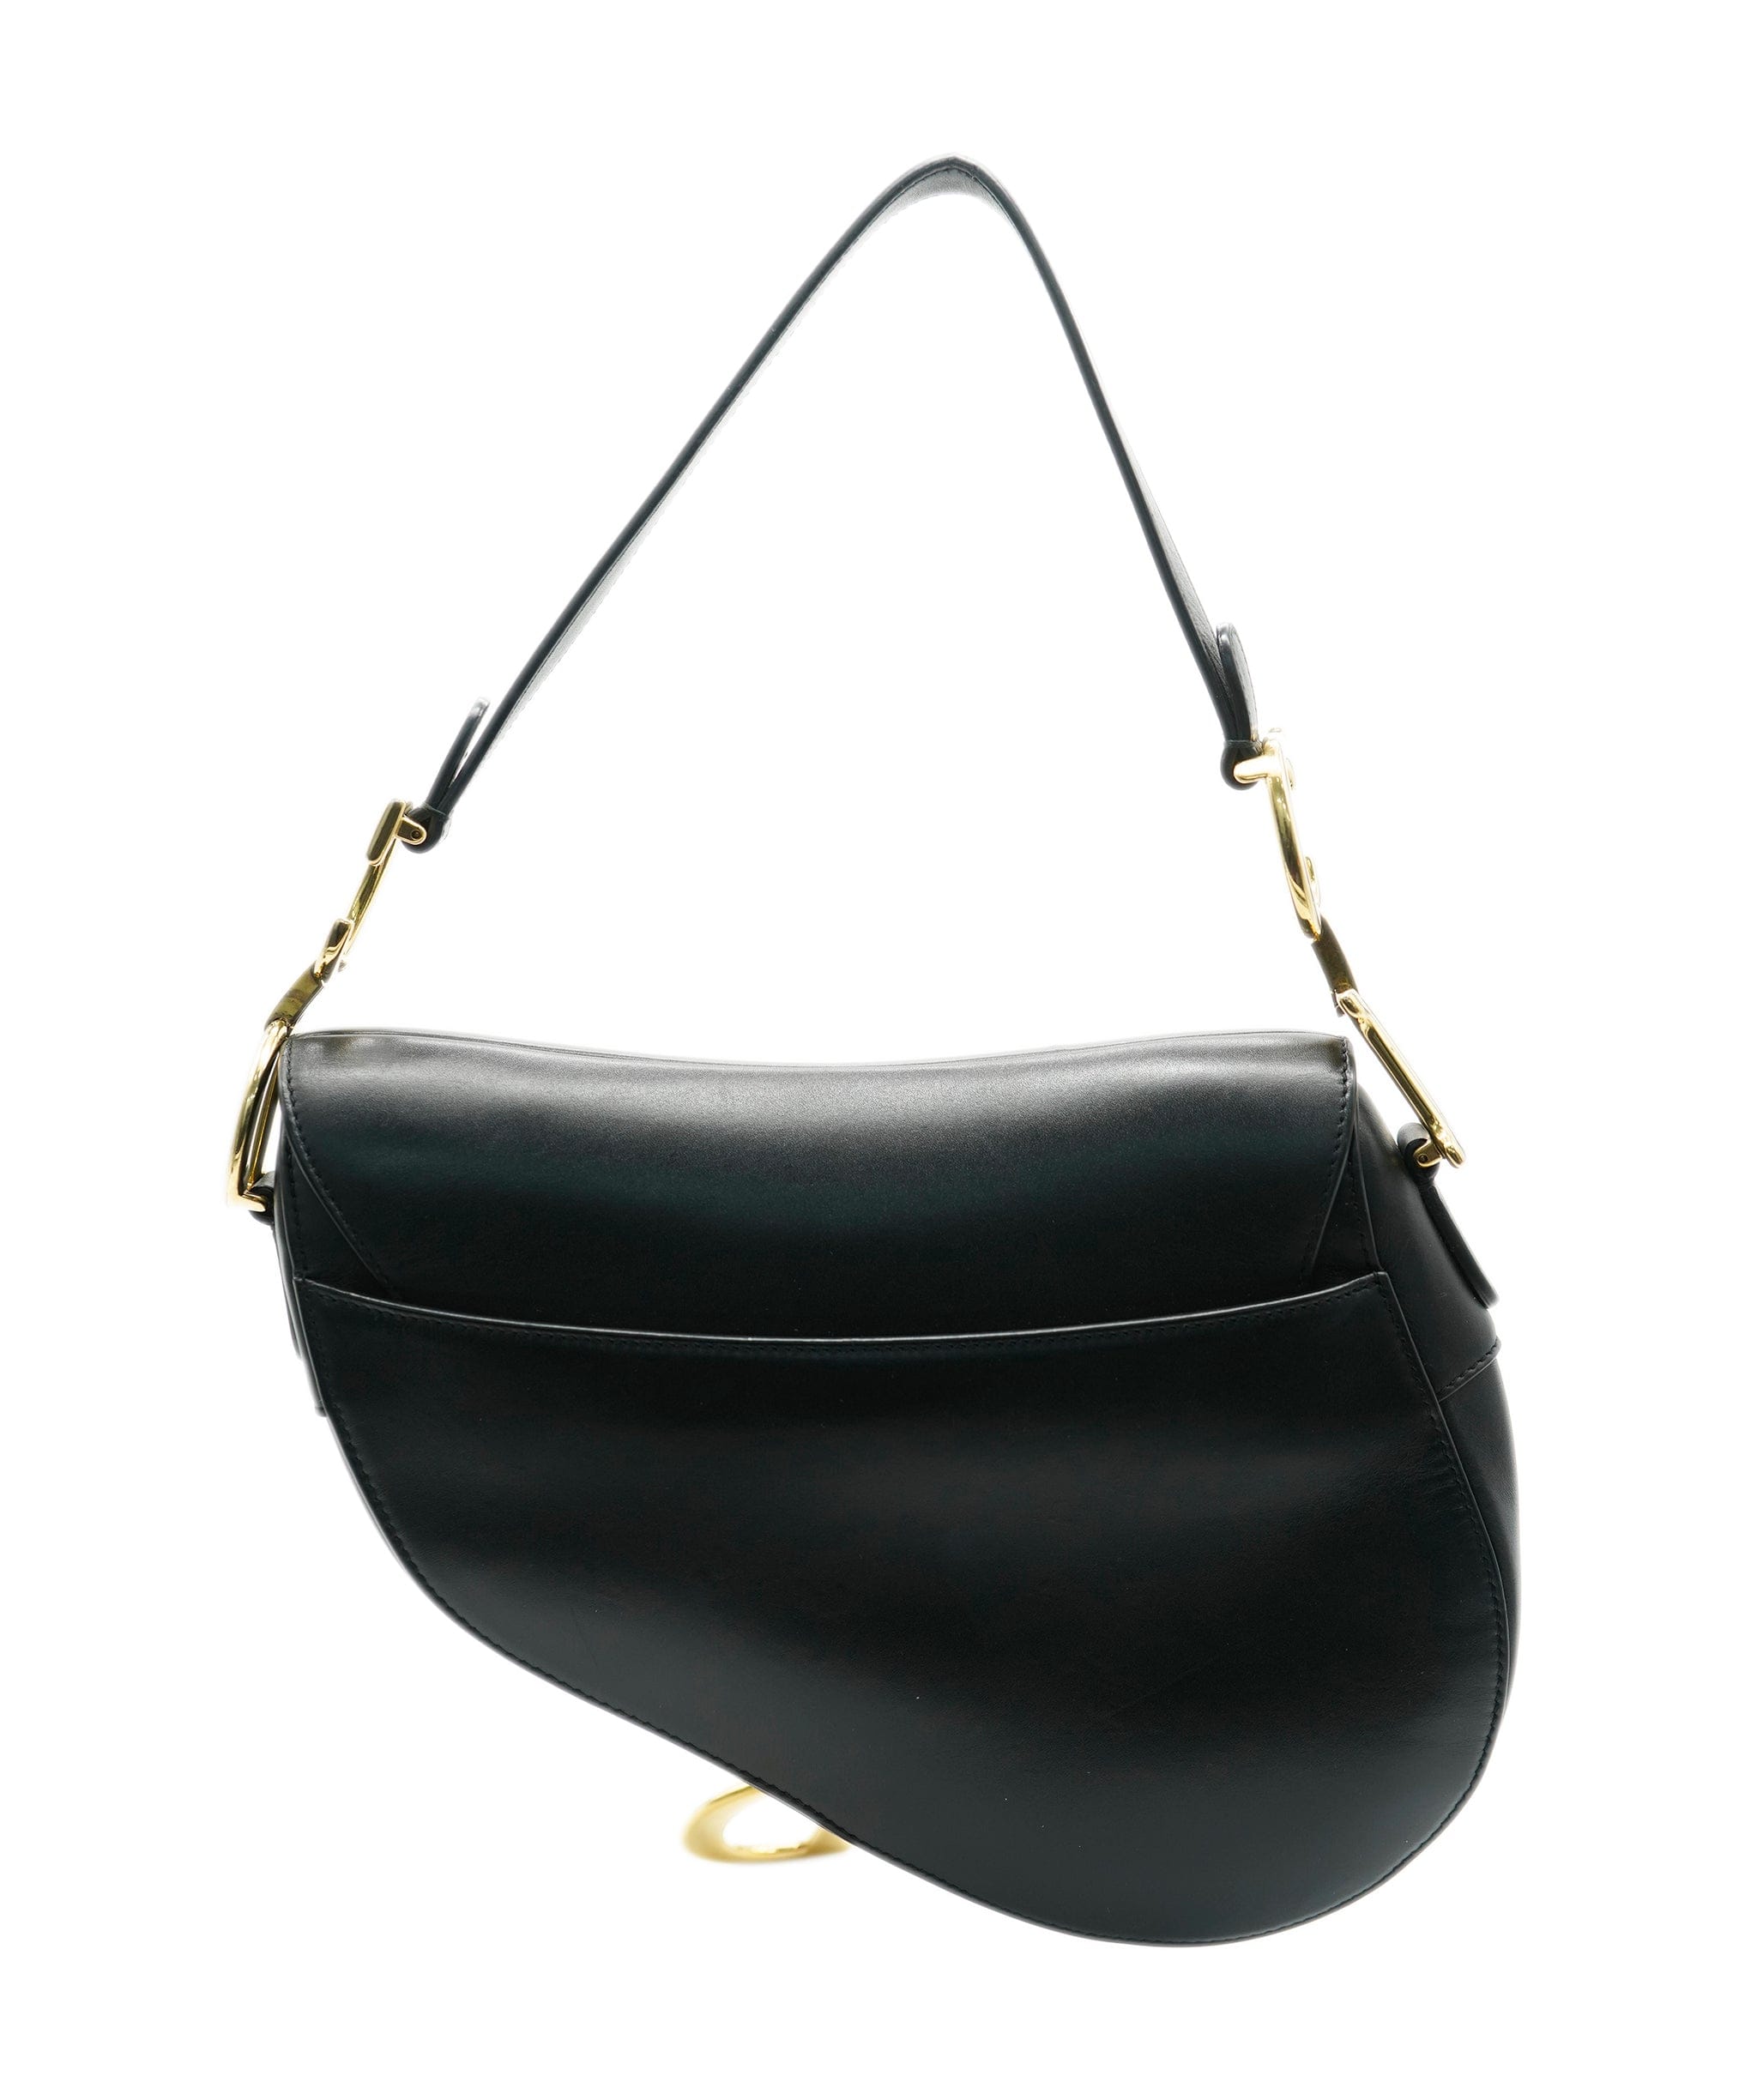 Christian Dior Large black Saddle with strap ALC1407